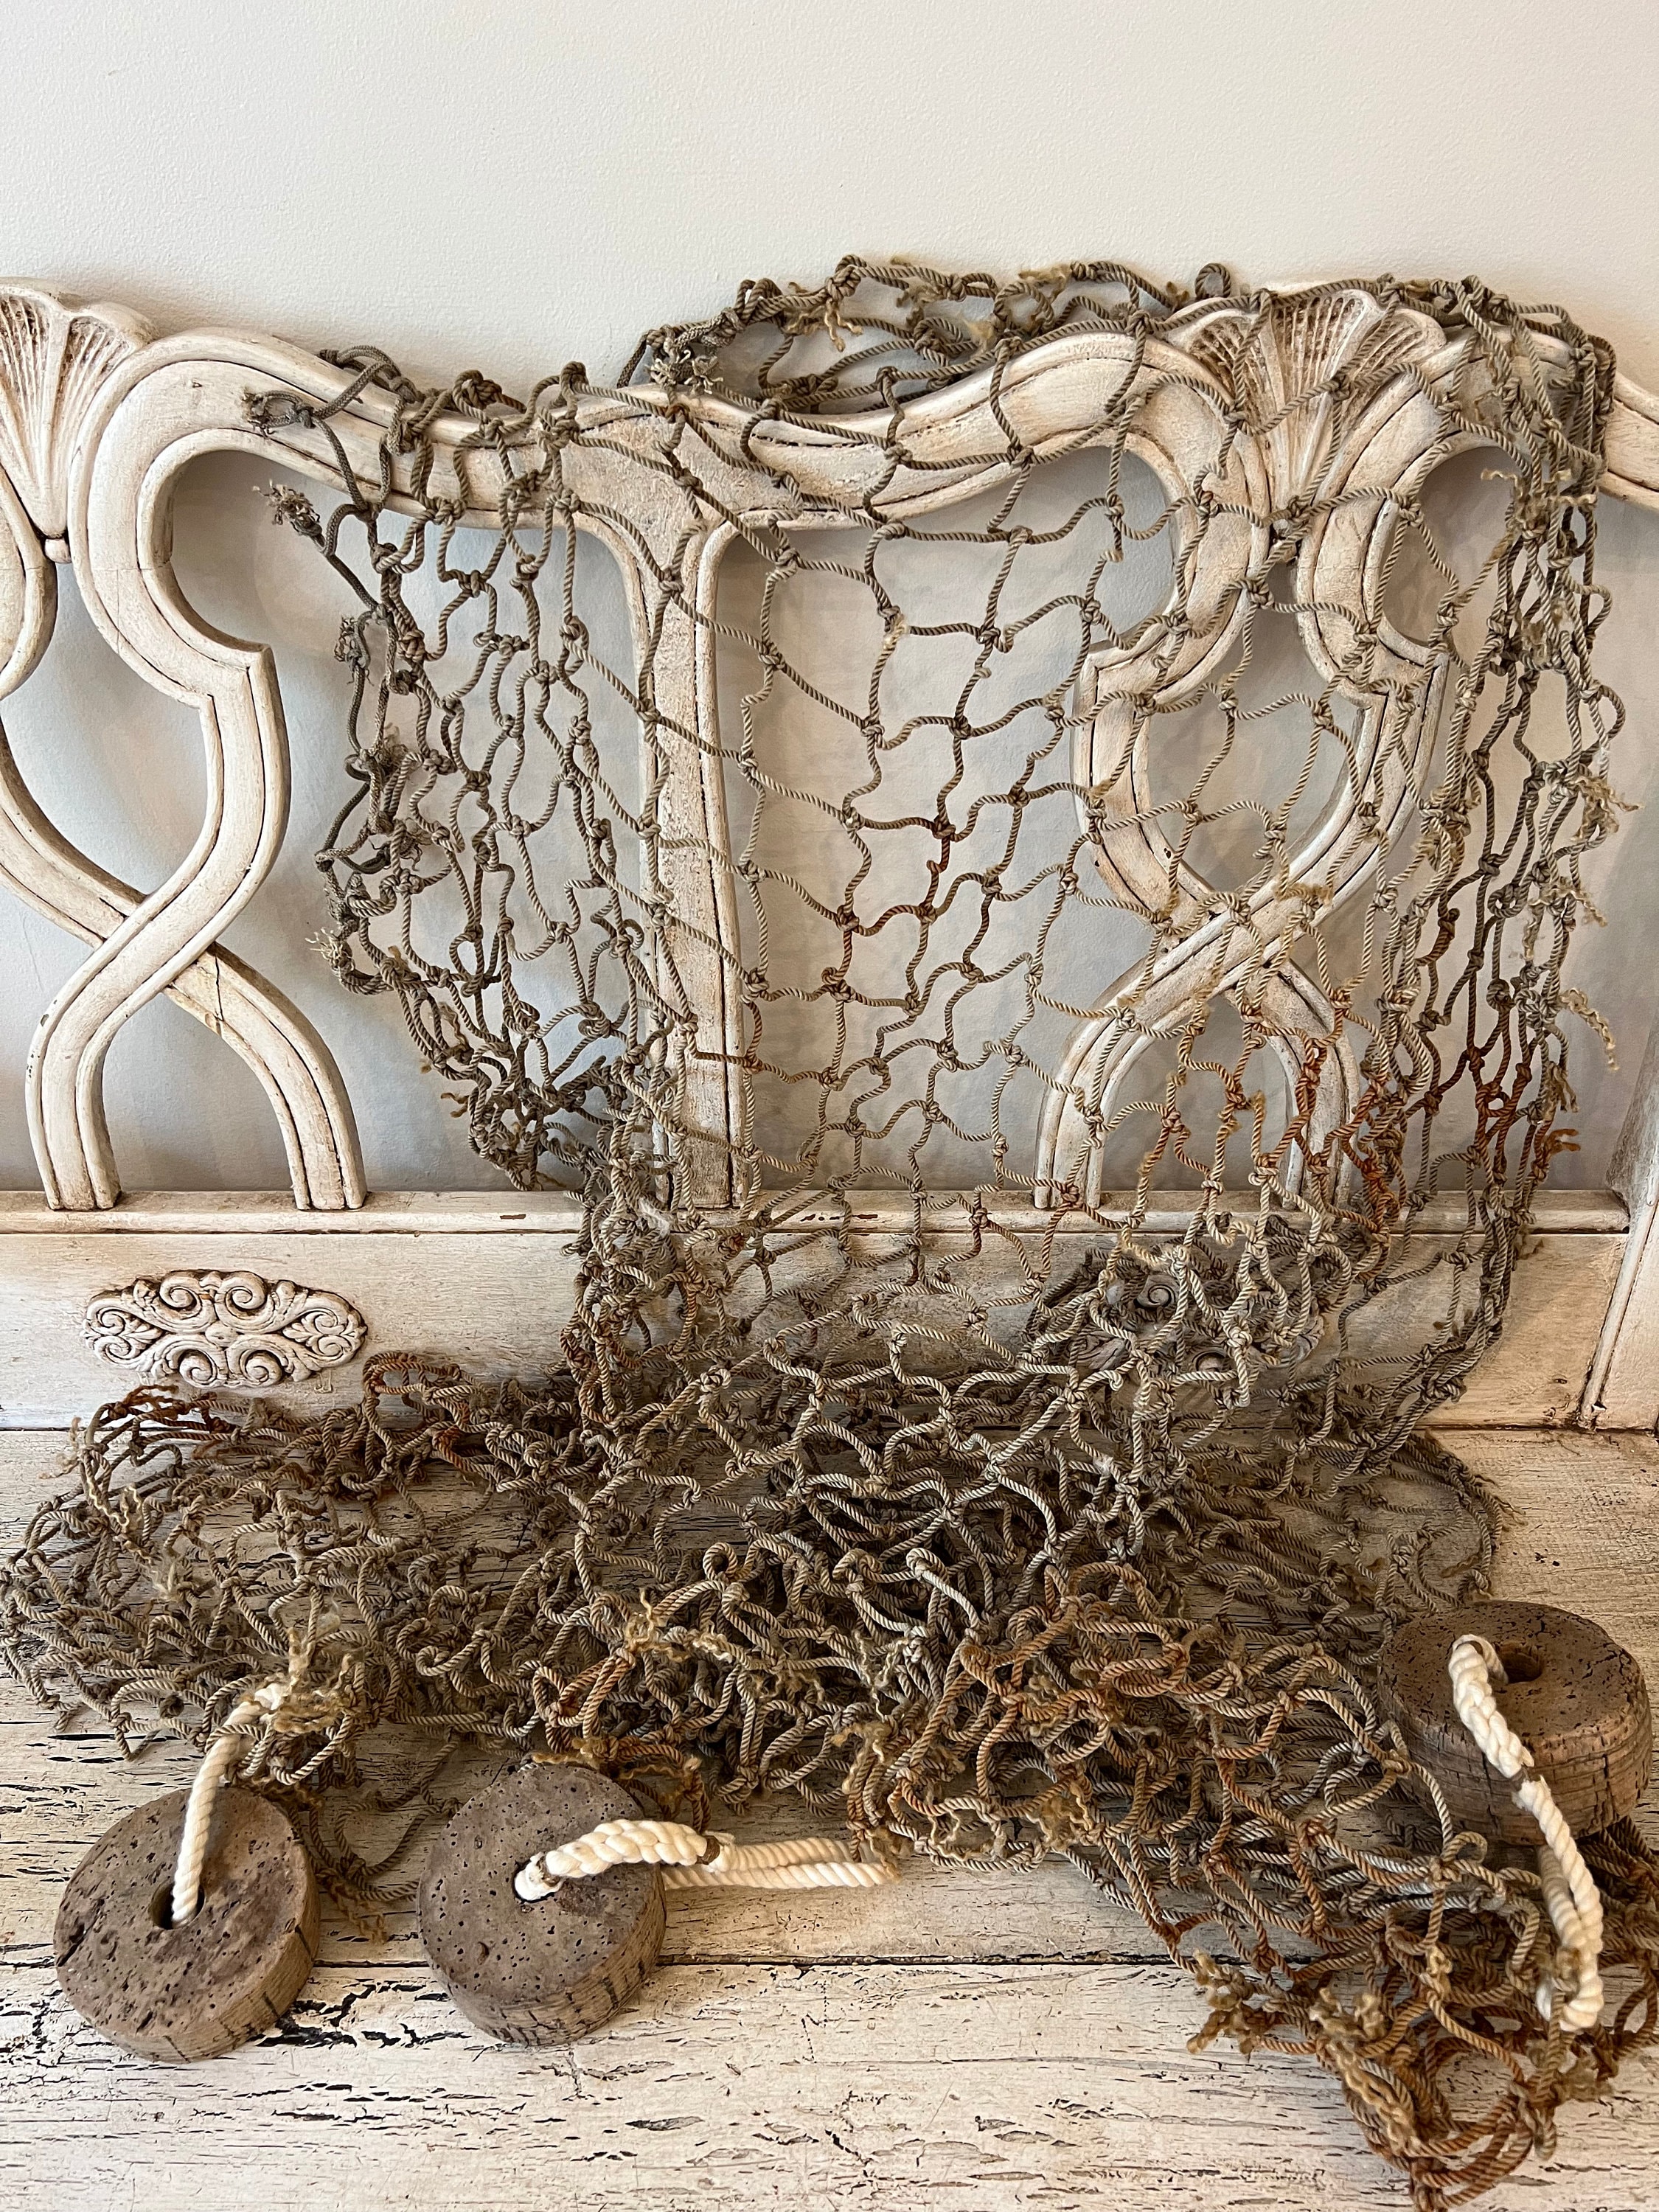 Authentic Fish Net Cut From Real Commercial Fishing Nets - 15 ft x